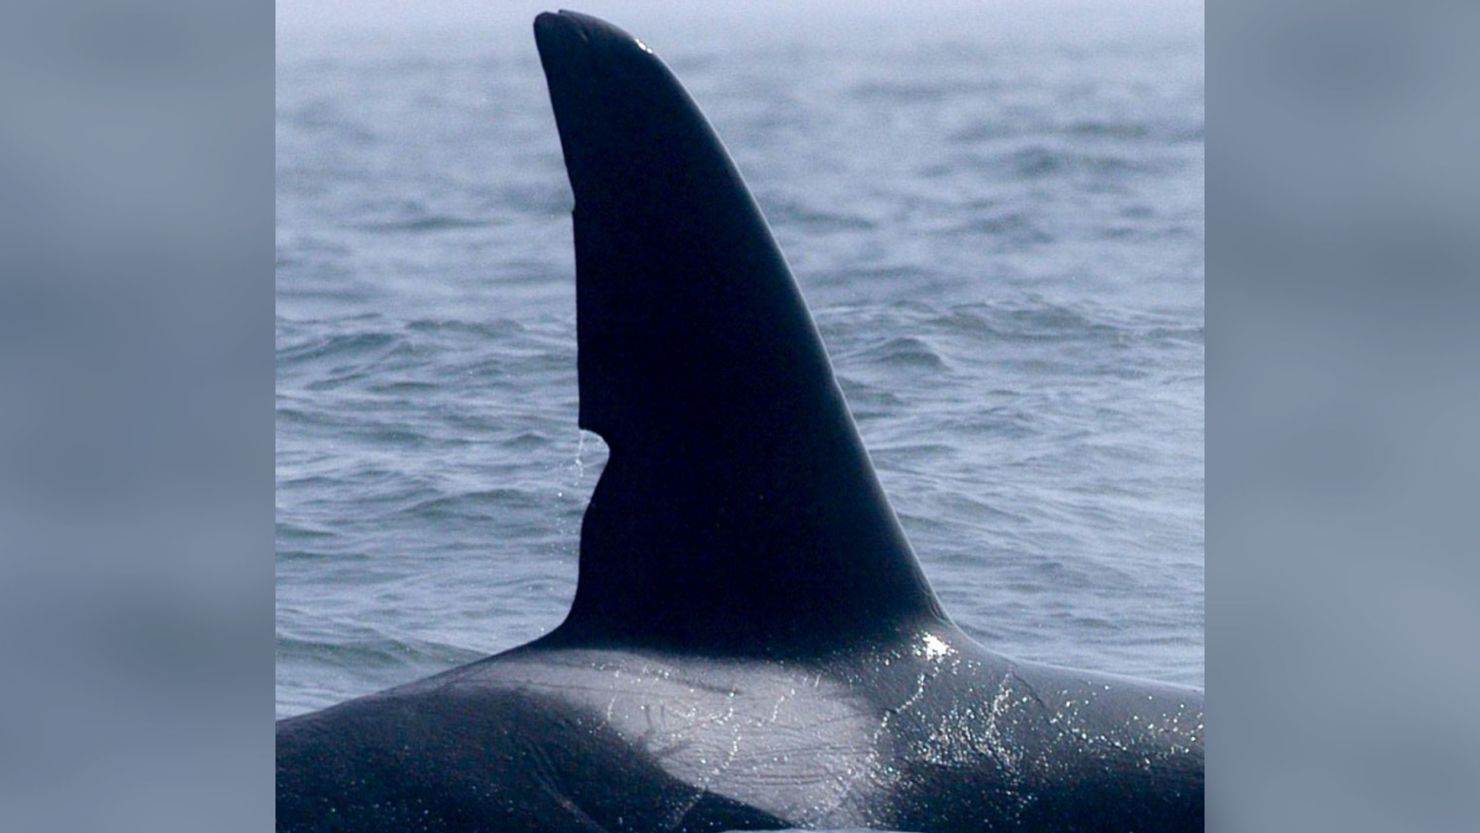 Outer Coast Transient Killer Whale